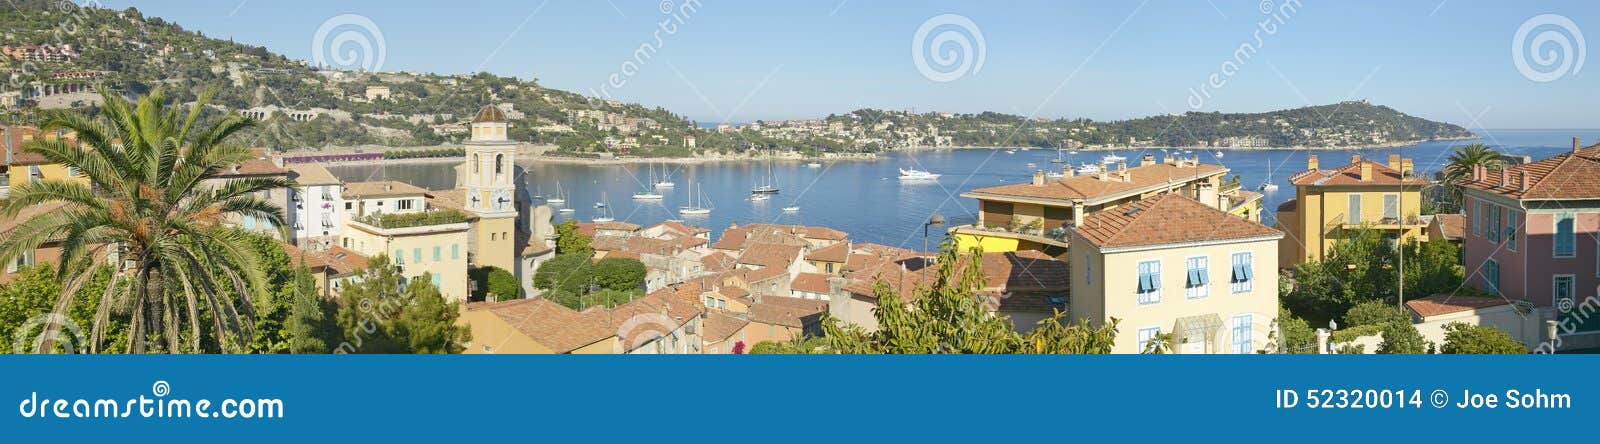 view of villefranche sur mer, french riviera, france